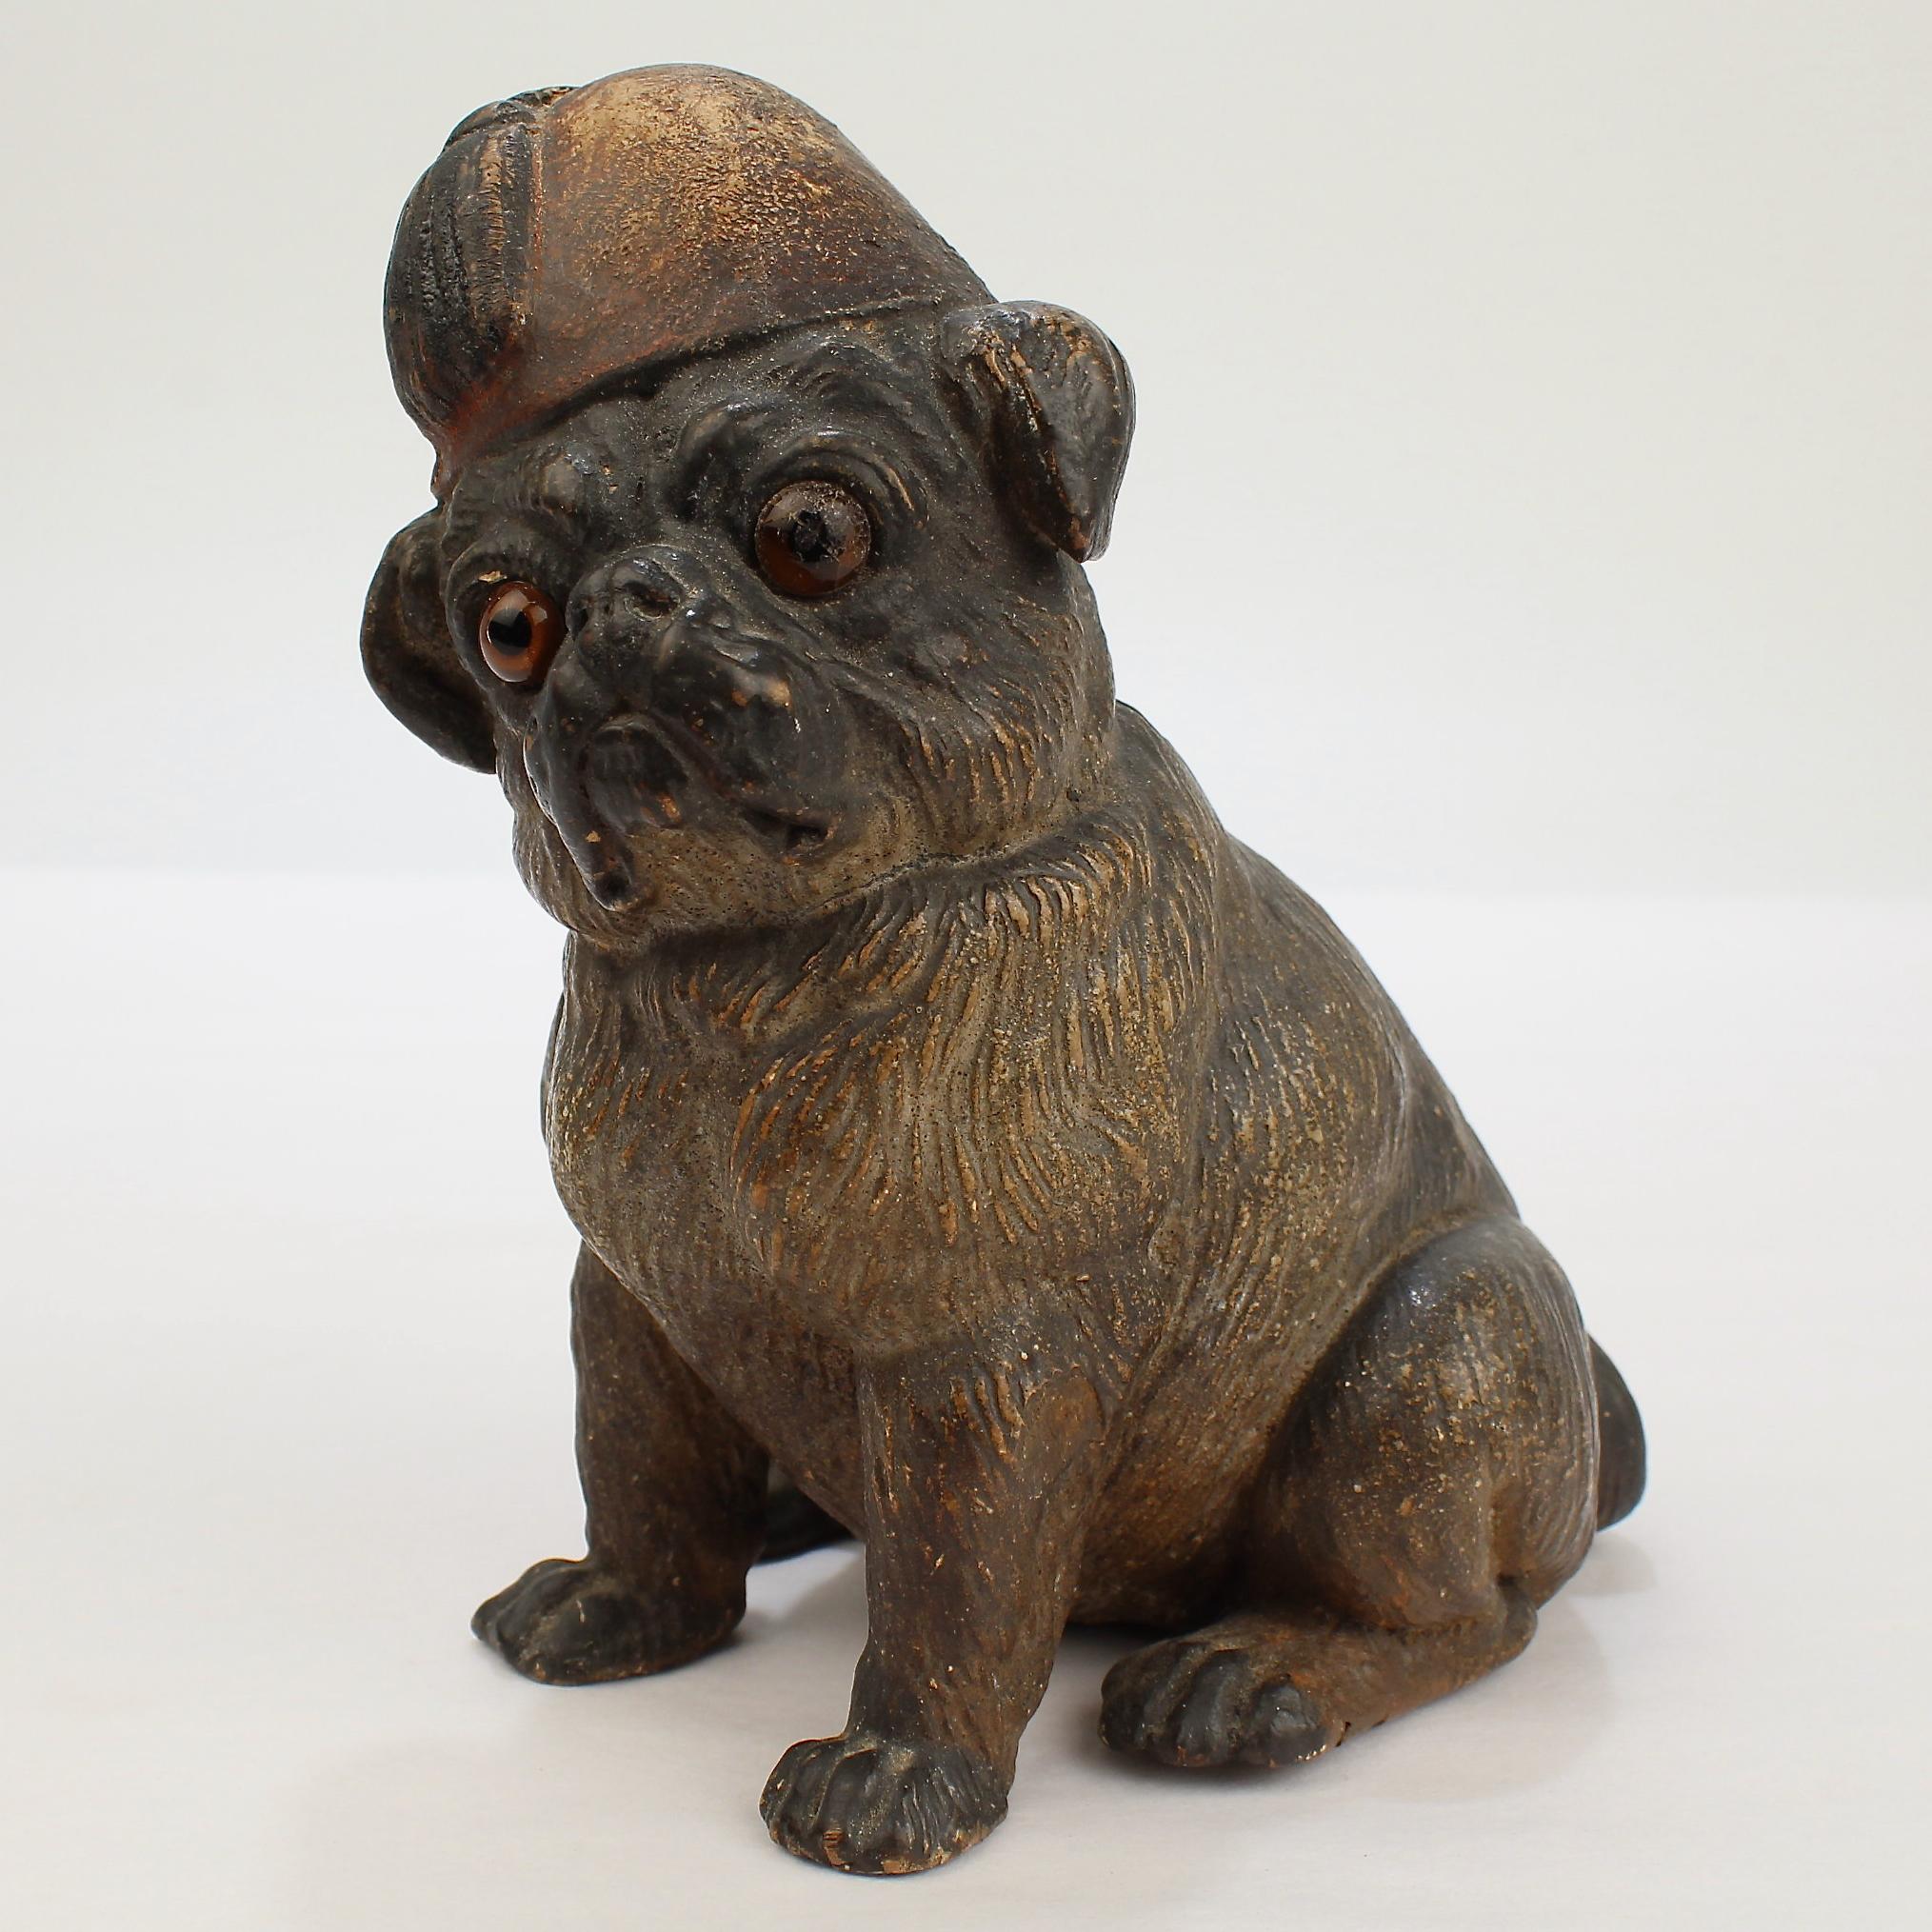 A very fine antique Austrian terra cotta dog figurine.

Depicted with its head slightly cocked to one side and wearing a Fez hat.

From the collection of Mario Buatta.

A stylish figurine directly from the collection of the legendary interior